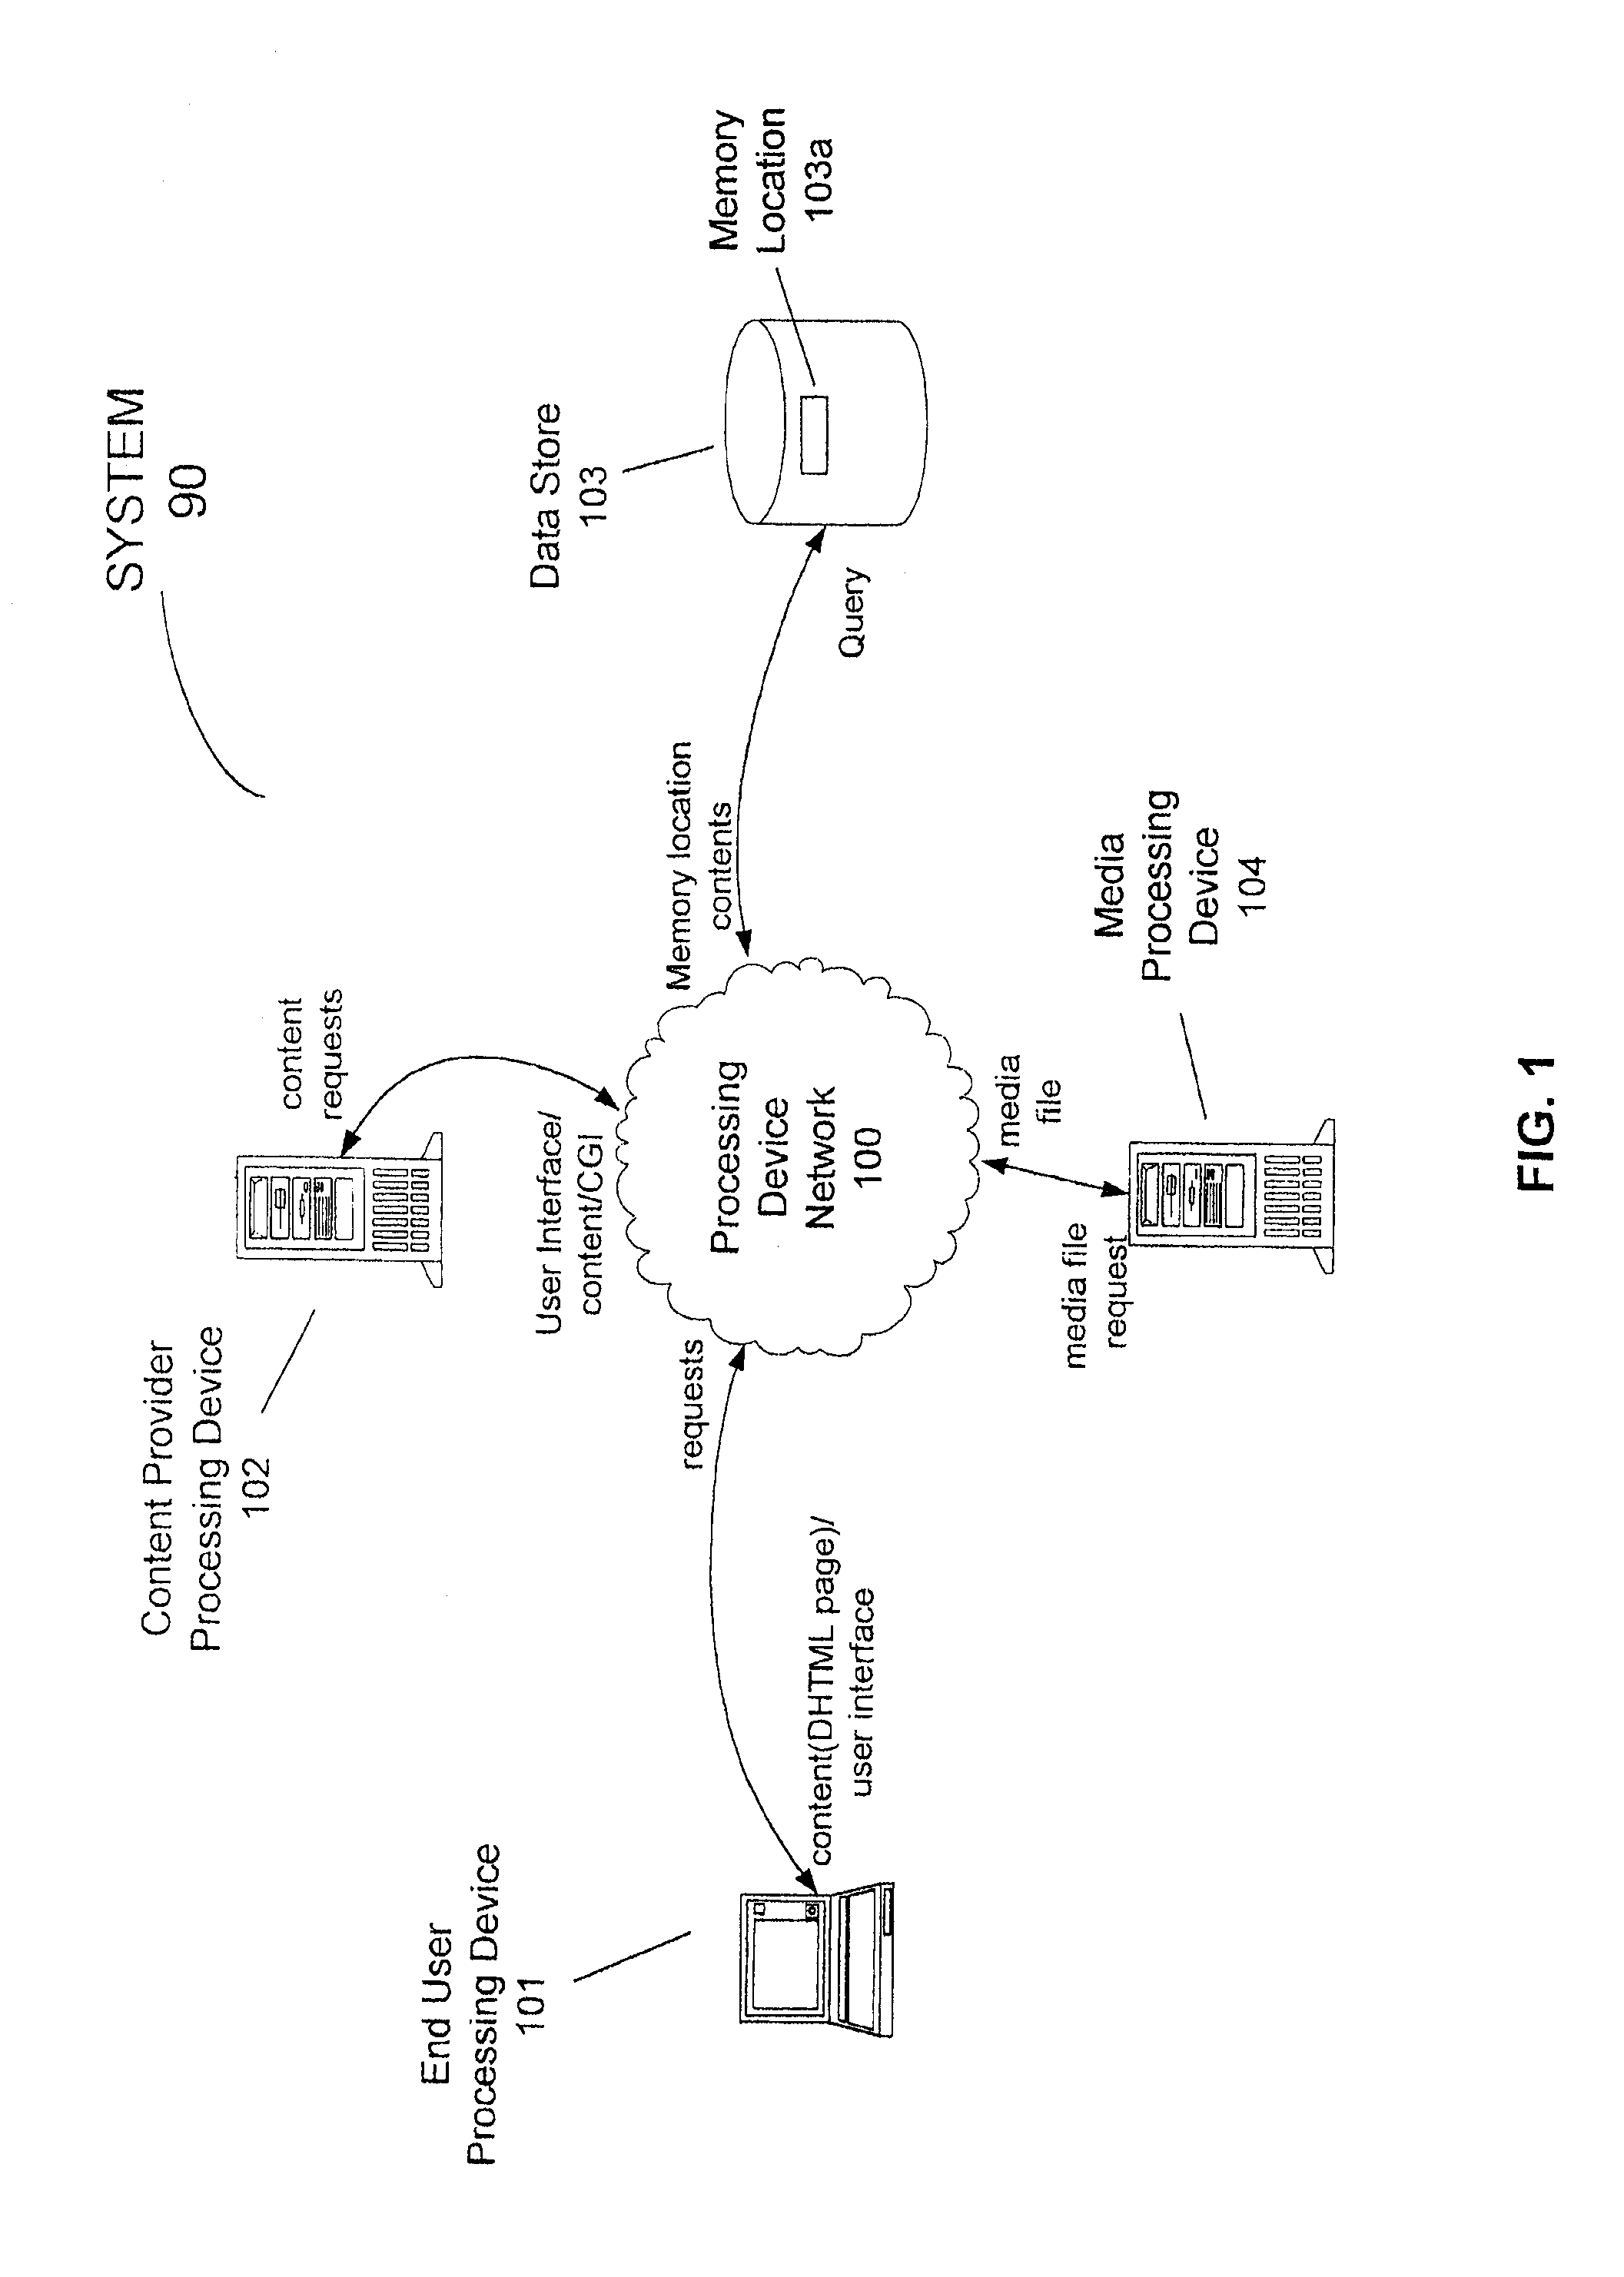 Method, system, and article of manufacture for integrating streaming content and a real time interactive dynamic user interface over a network